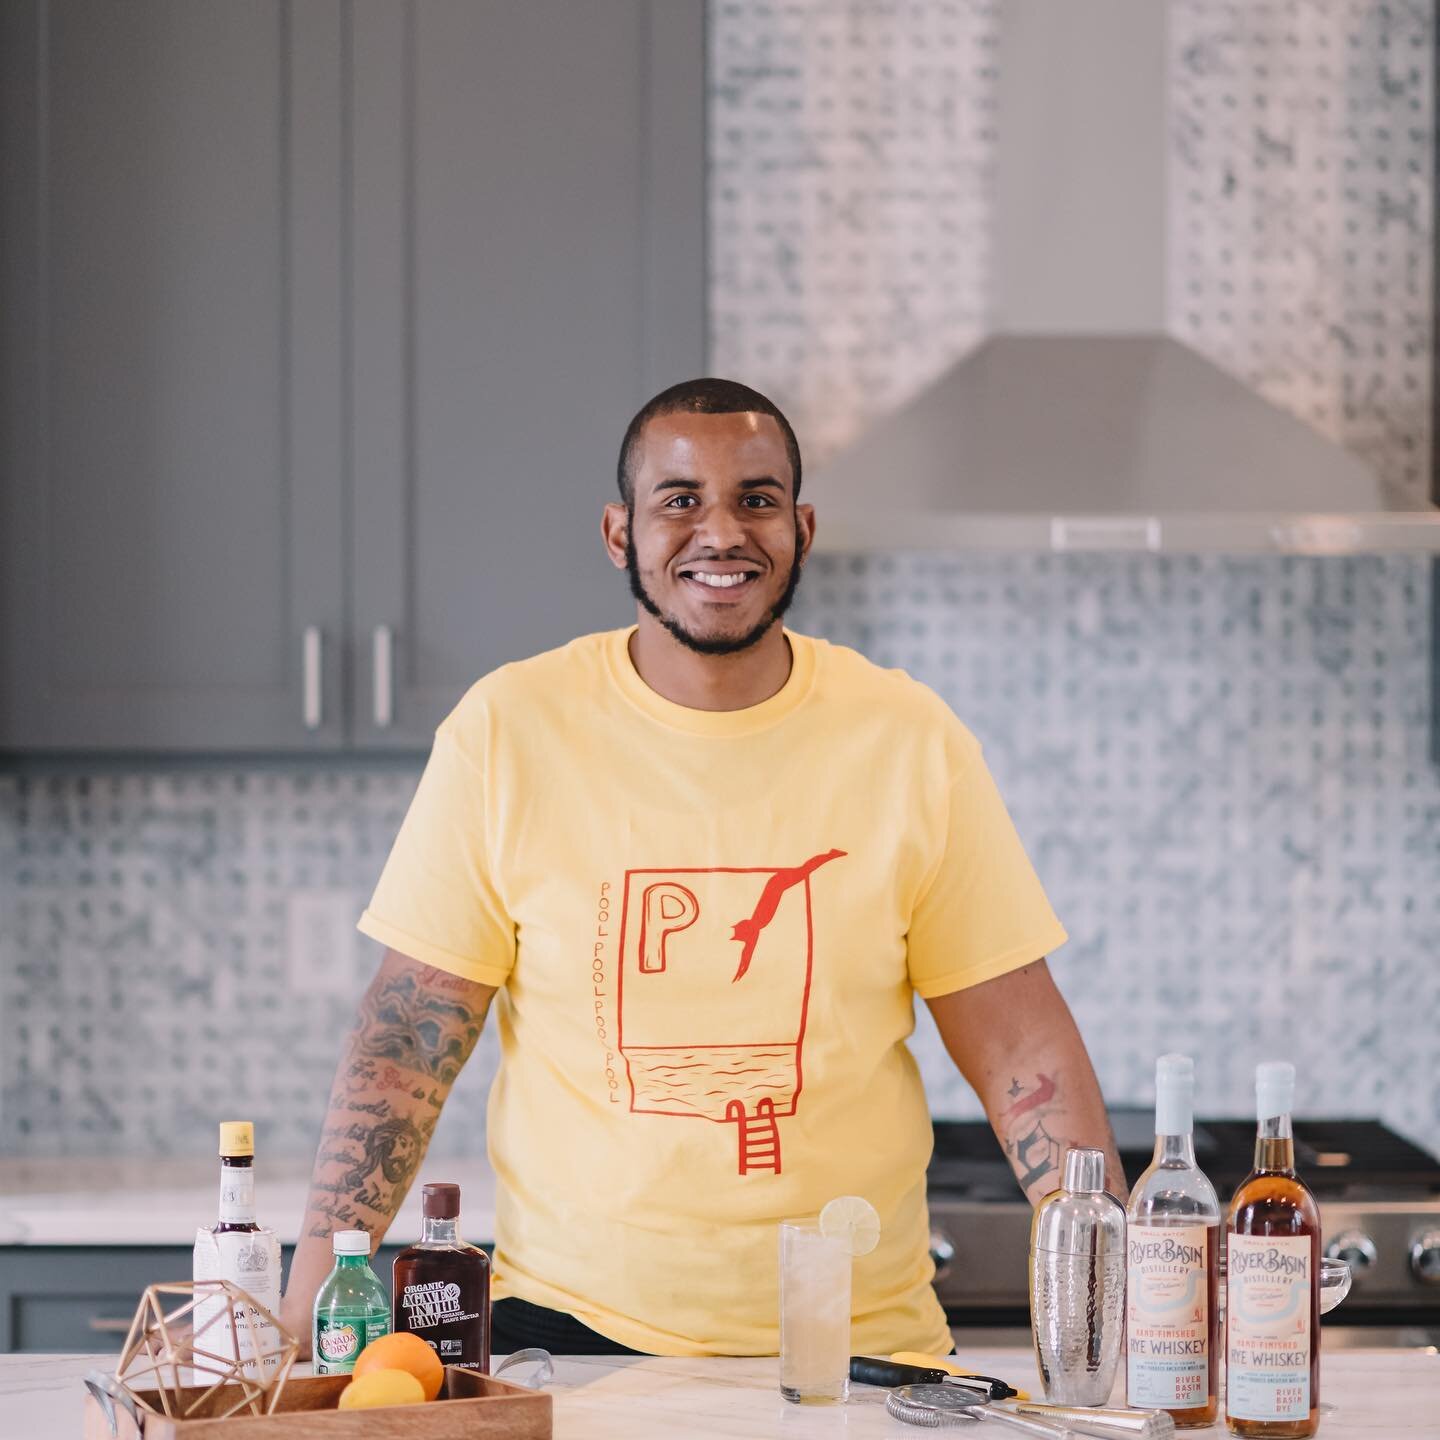 Meet Edward Allen ( @_restmike ). A bartender at Palace Café, Edward started in the industry after graduating high school. In his approach to cocktails Edward strives to pay homage to New Orleans&rsquo; storied cocktail history, while ensuring his w